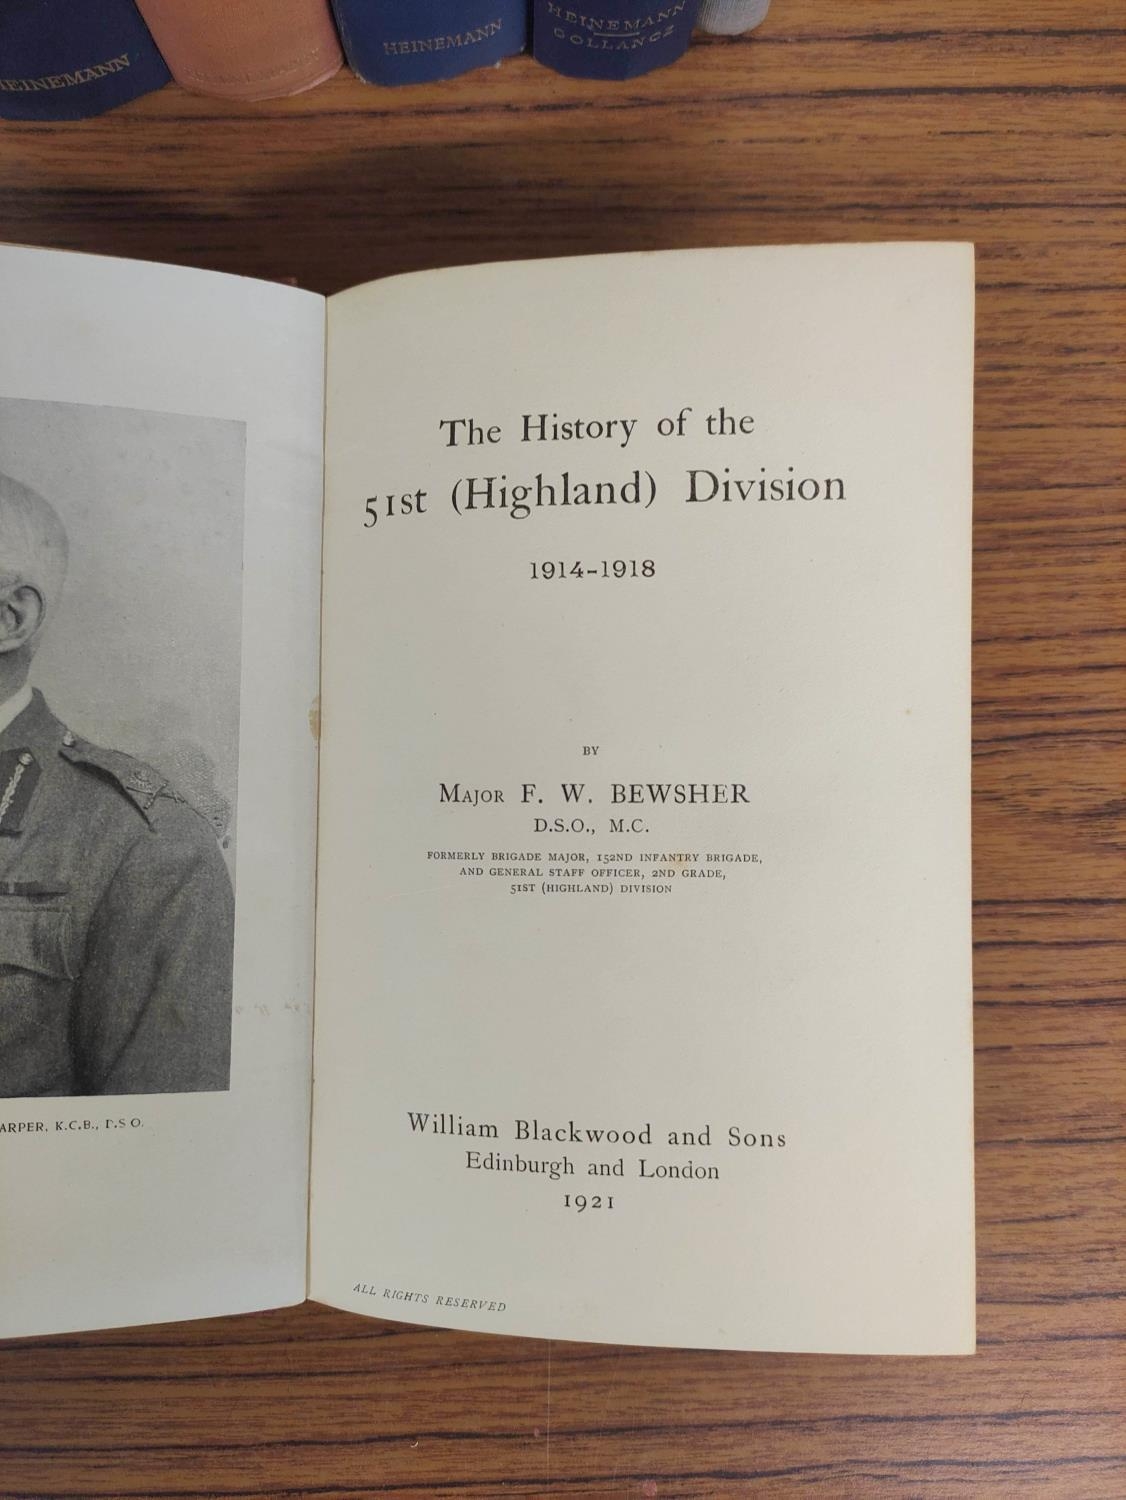 BEWSHER F. W.  The History of the 51st (Highland) Division, 1914-1918. Illus. Orig. red cloth, - Image 4 of 6